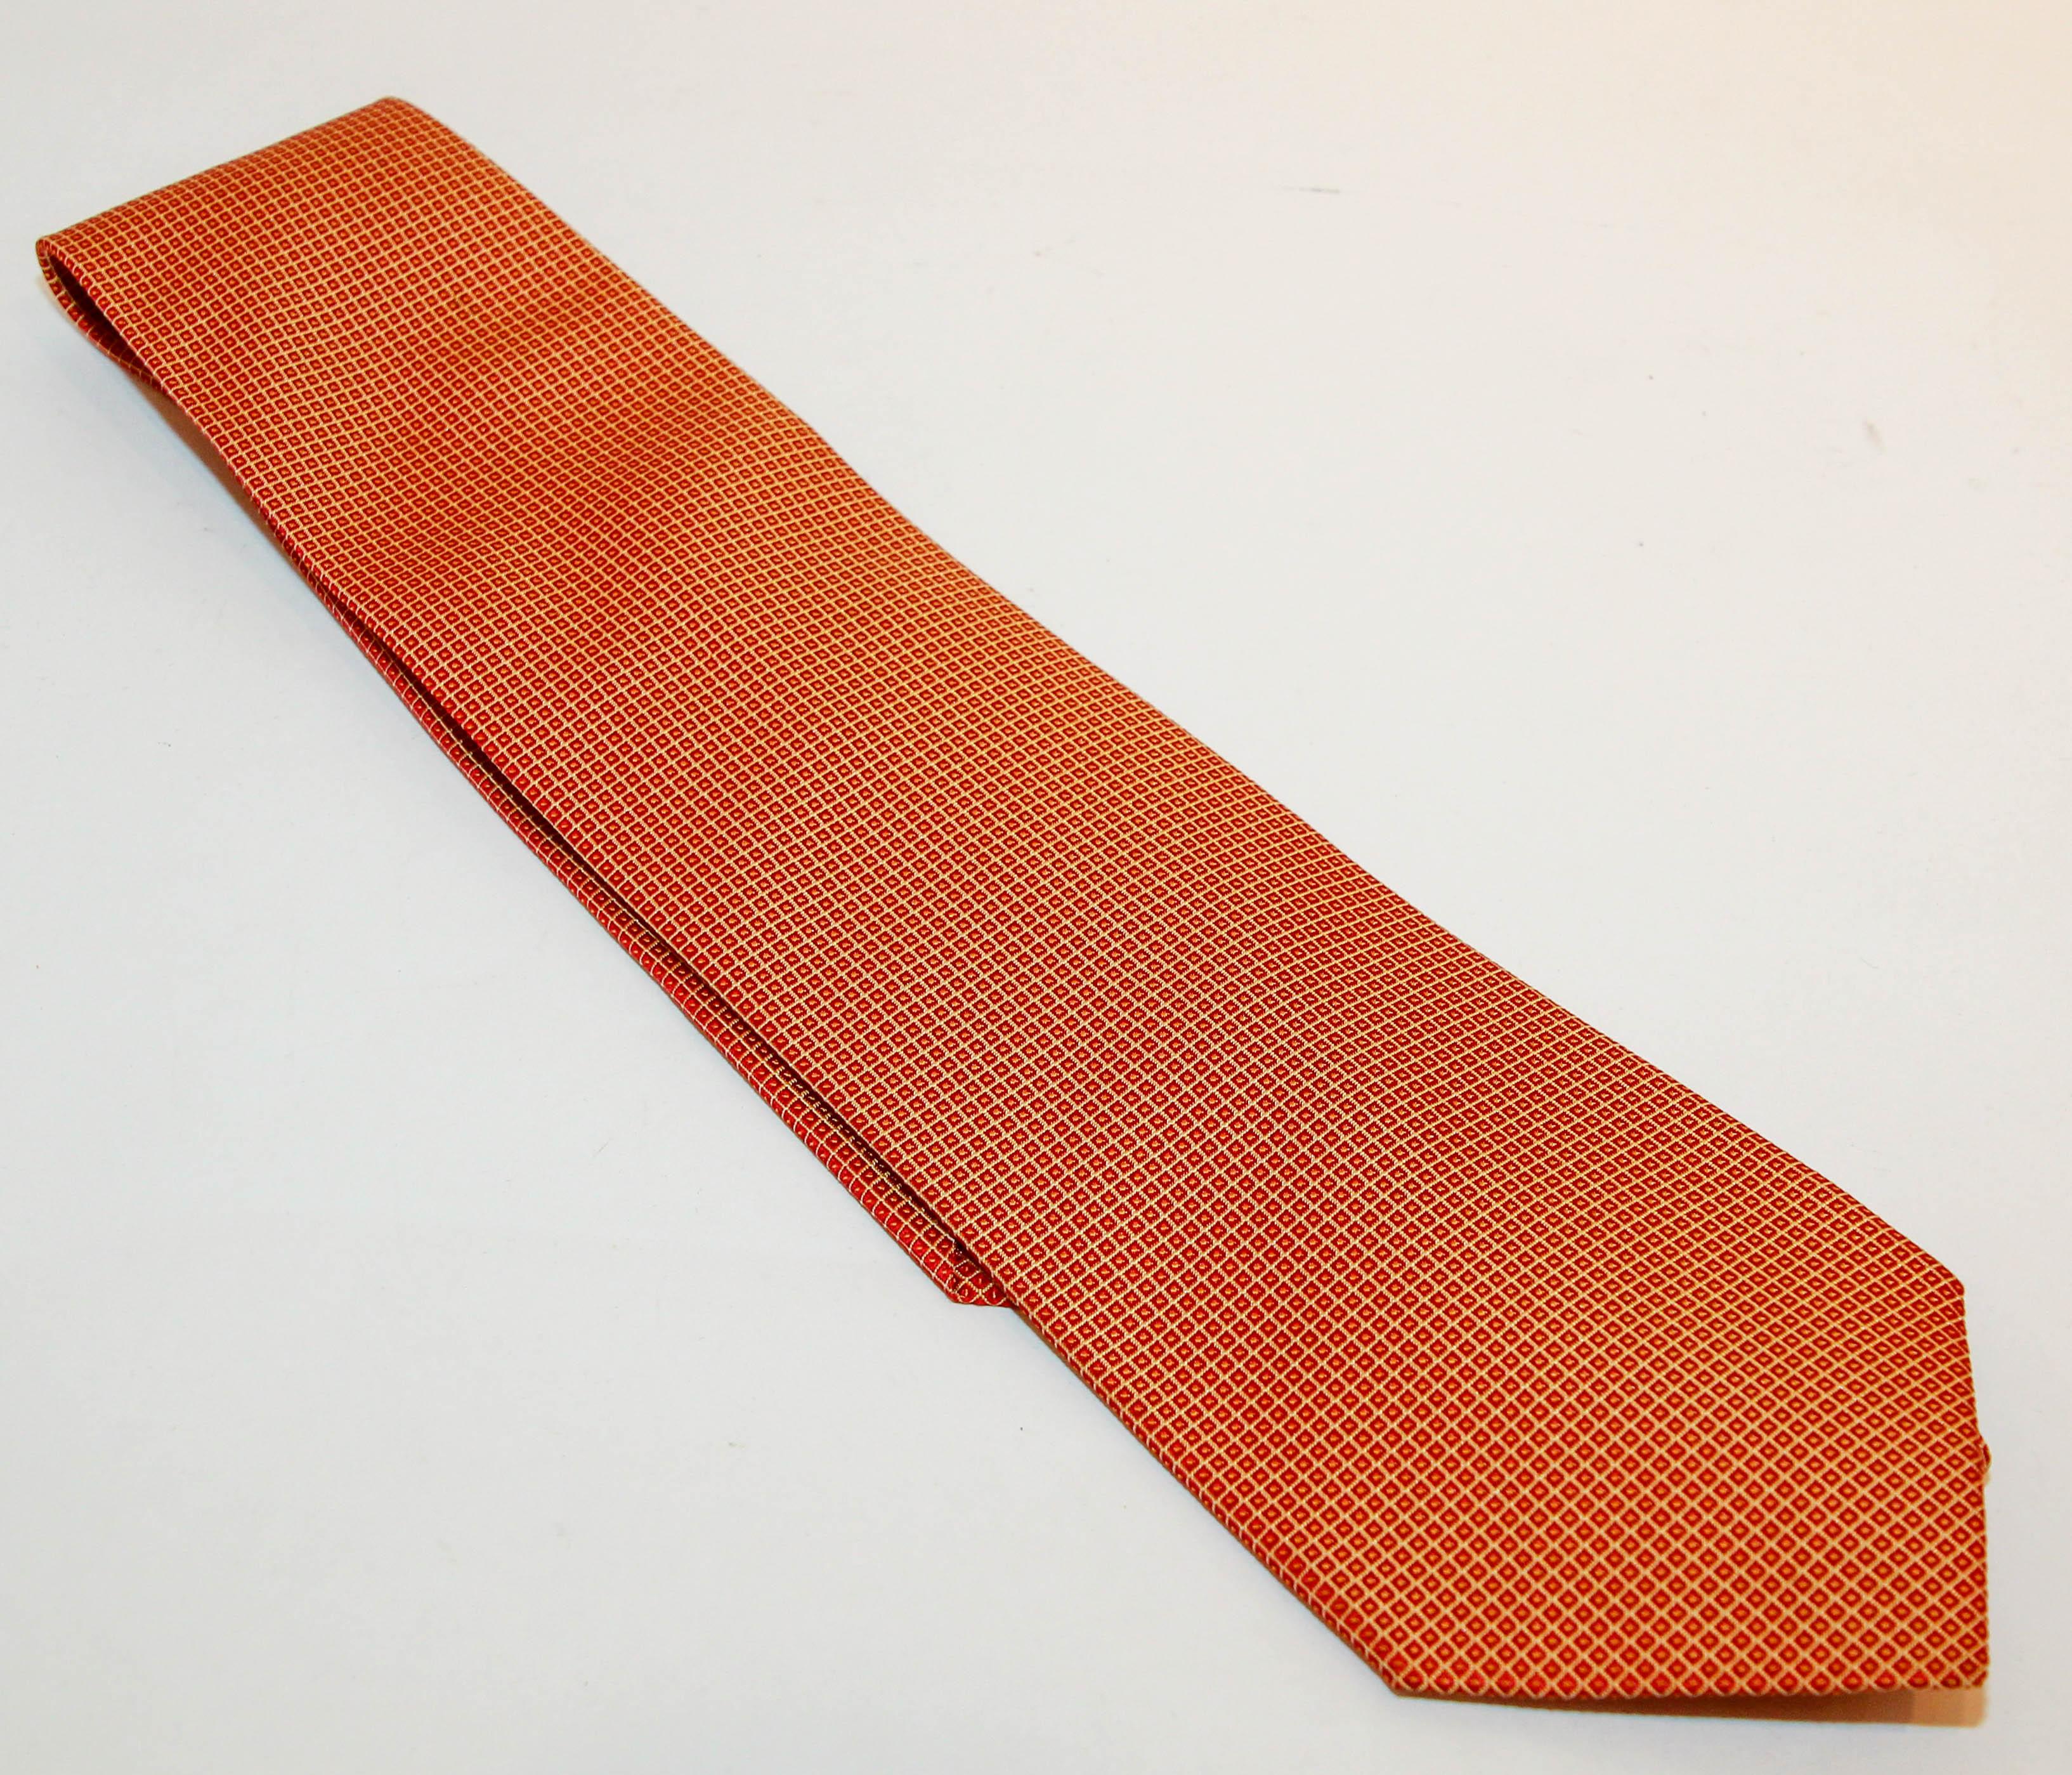 Sonia Rykiel Homme vintage silk tie repeat pattern men dress necktie.
Dress Silk Necktie Designed by Sonia Rykiel, Made in France.
100% silk Dry clean only.
Burnt orange and gold colors silk tie.
LENGTH : 58 inches
WIDTH : 3.8 inches,